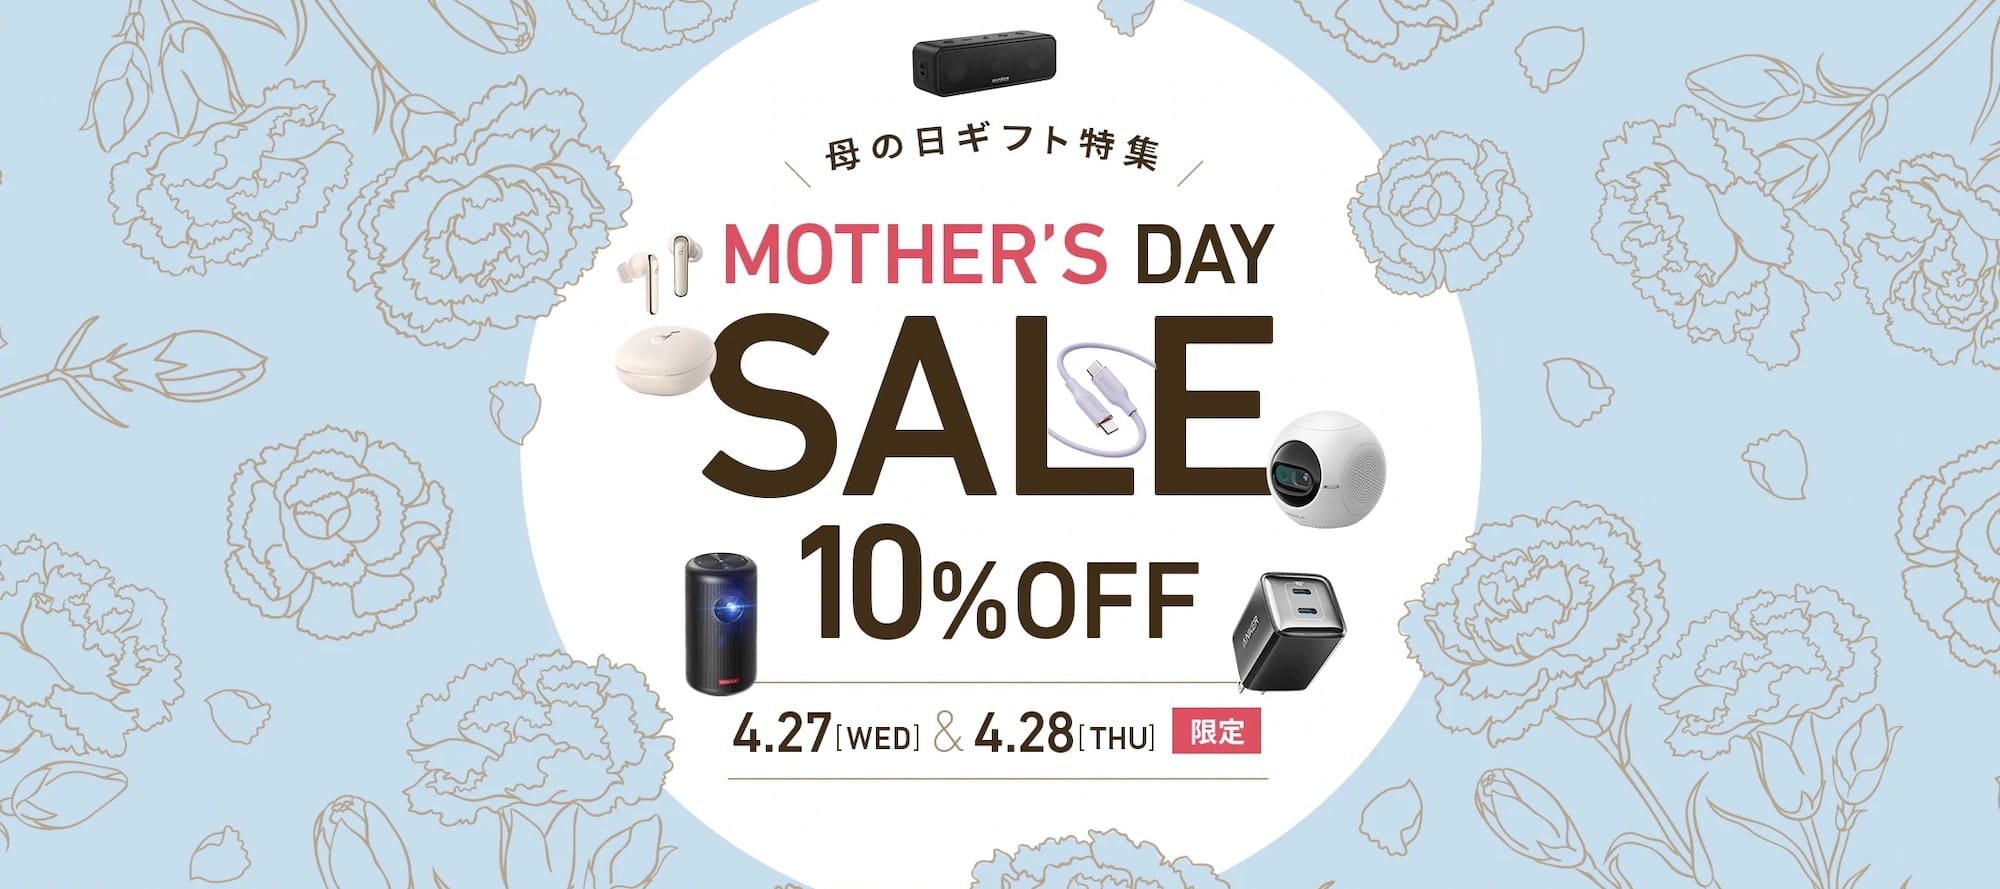 Anker、10%オフの母の日セール開催